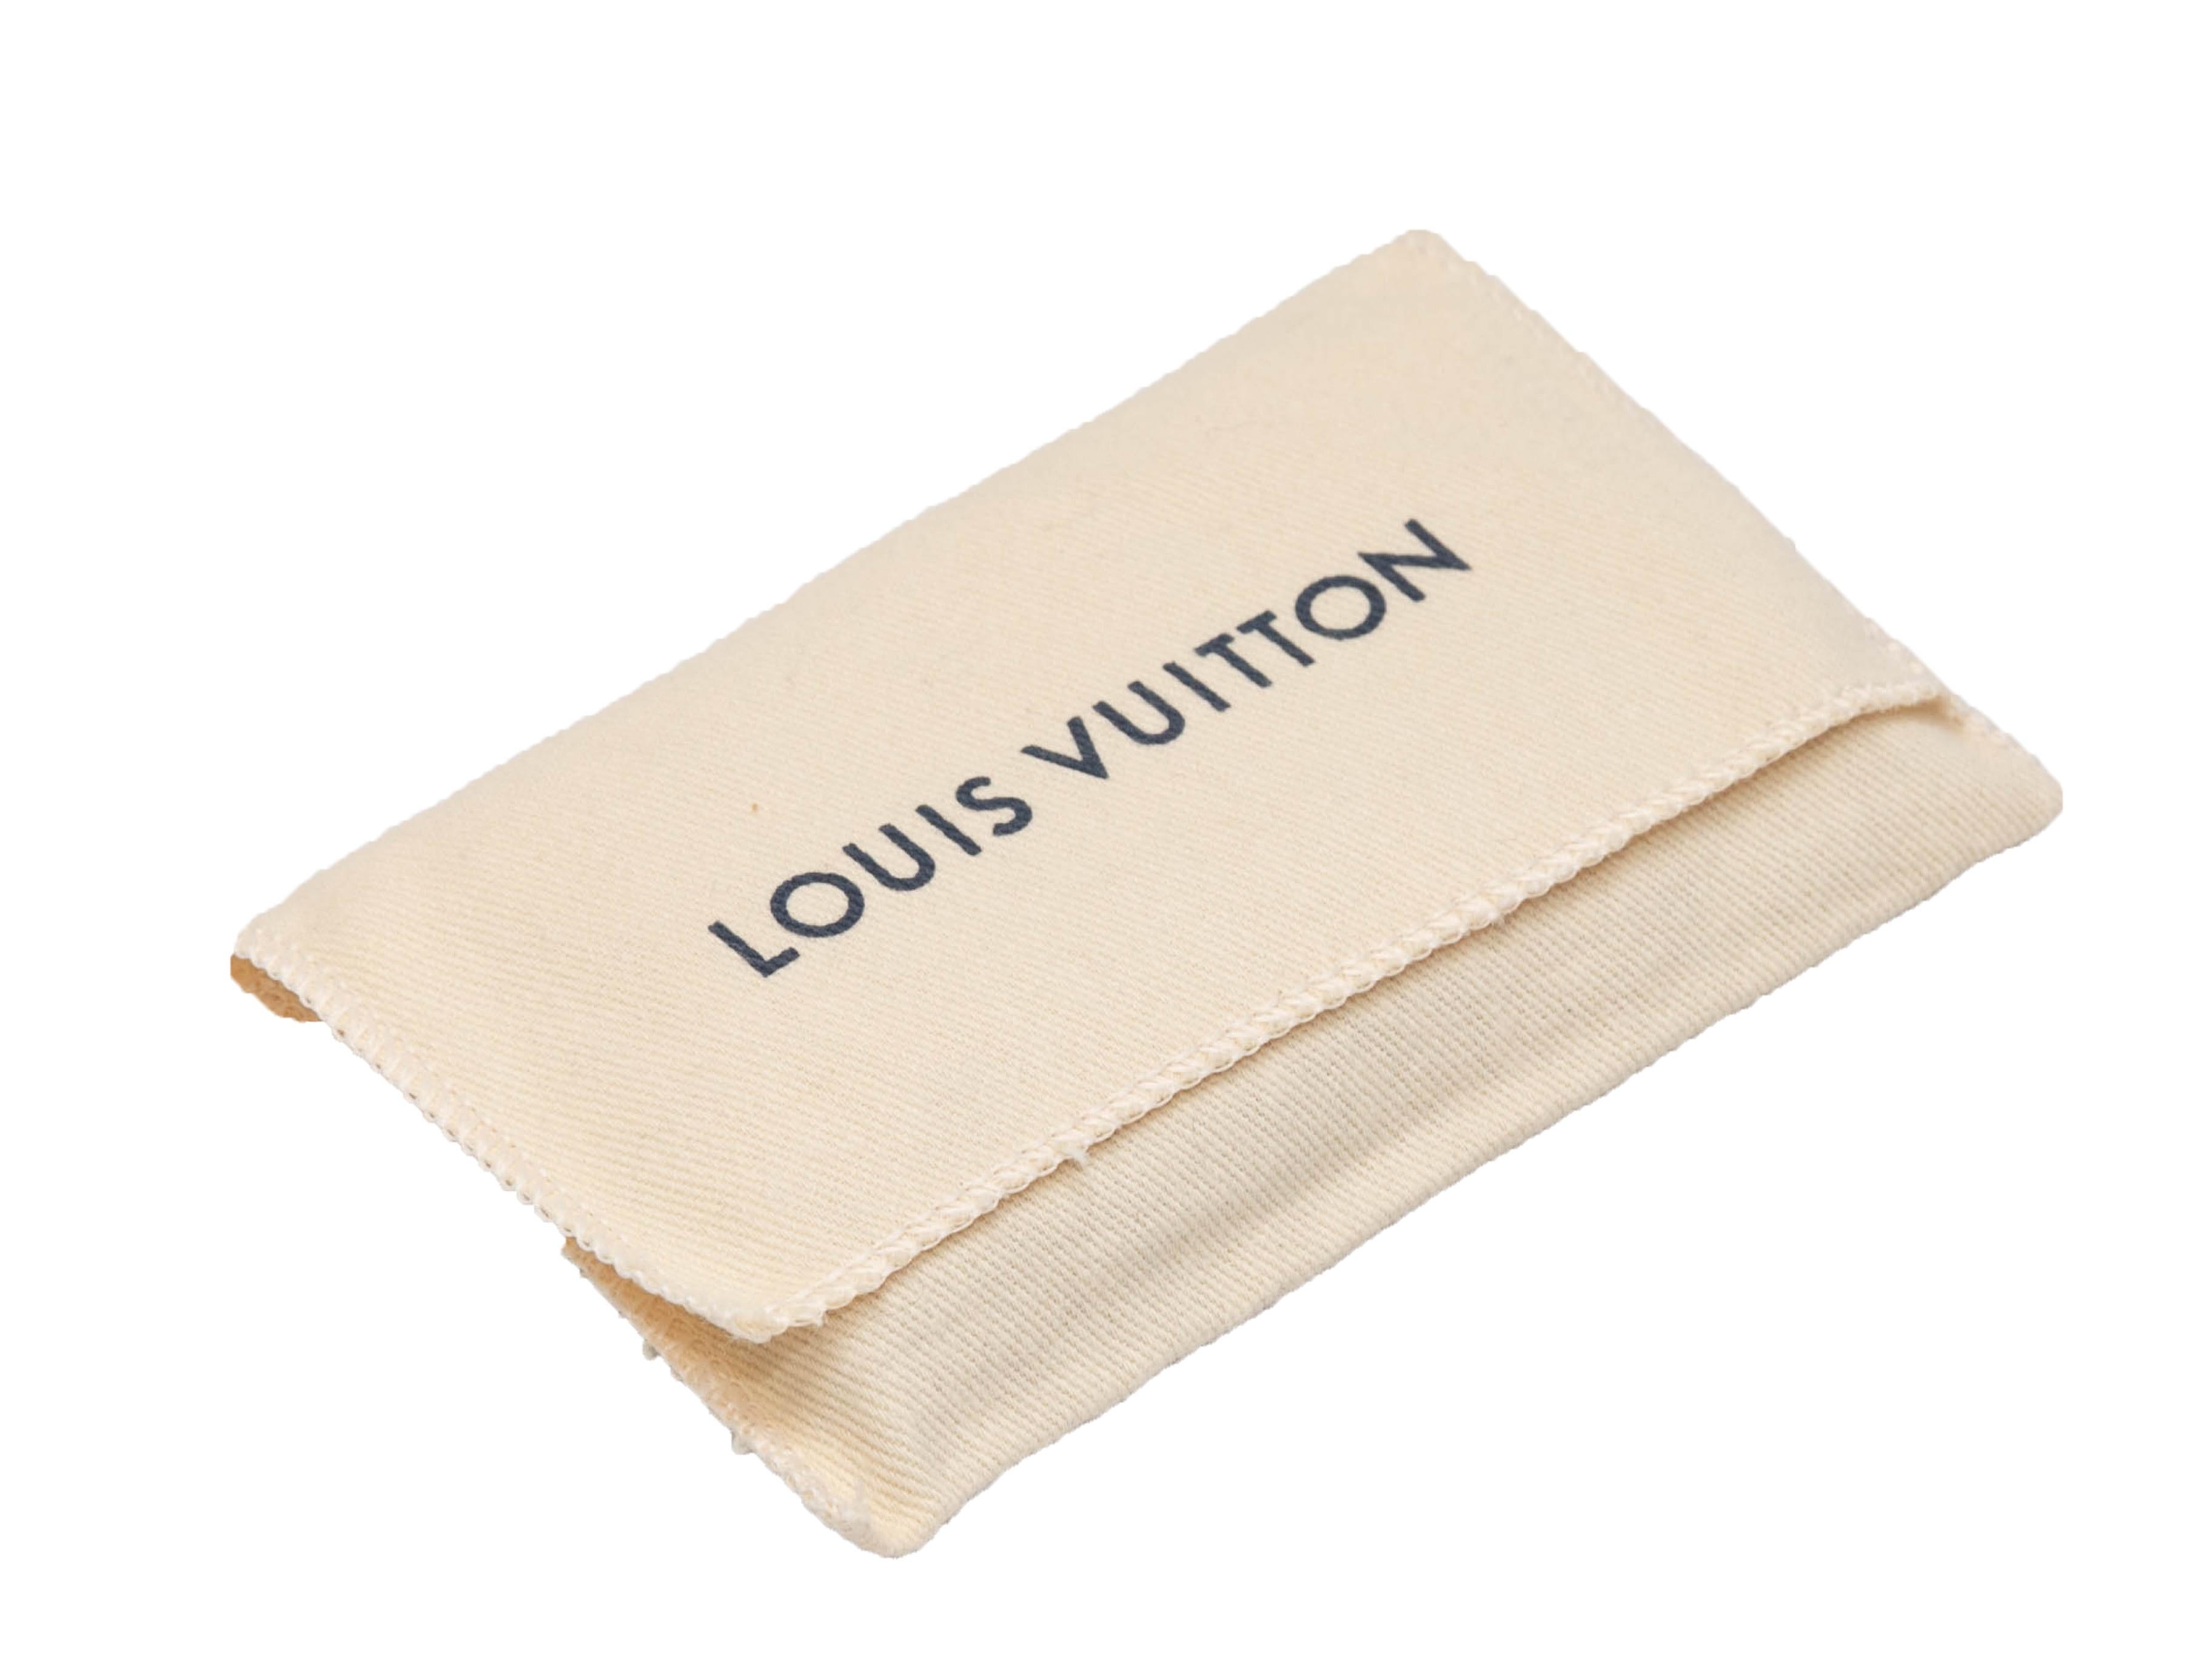 Red Louis Vuitton Epi Leather Key Holder For Sale 1